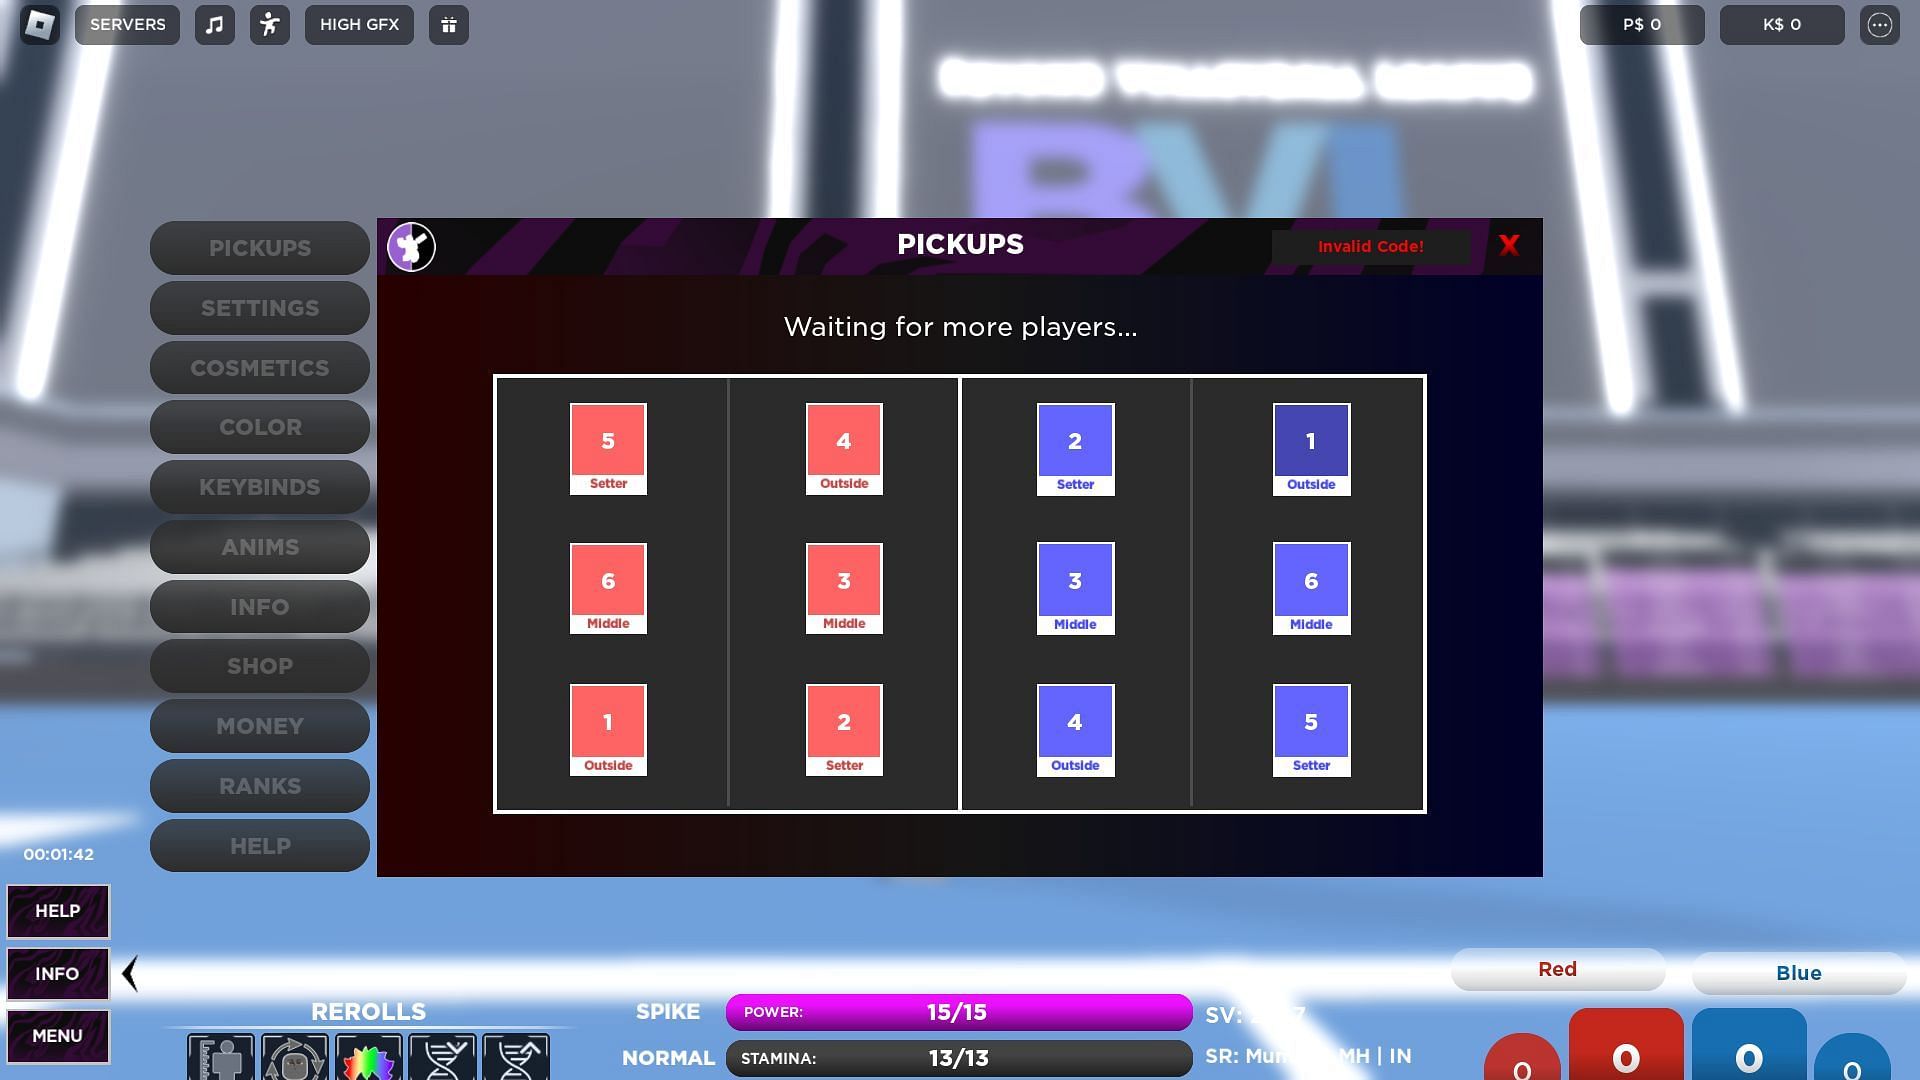 Troubleshooting codes for Beyond Volleyball League (Image via Roblox)